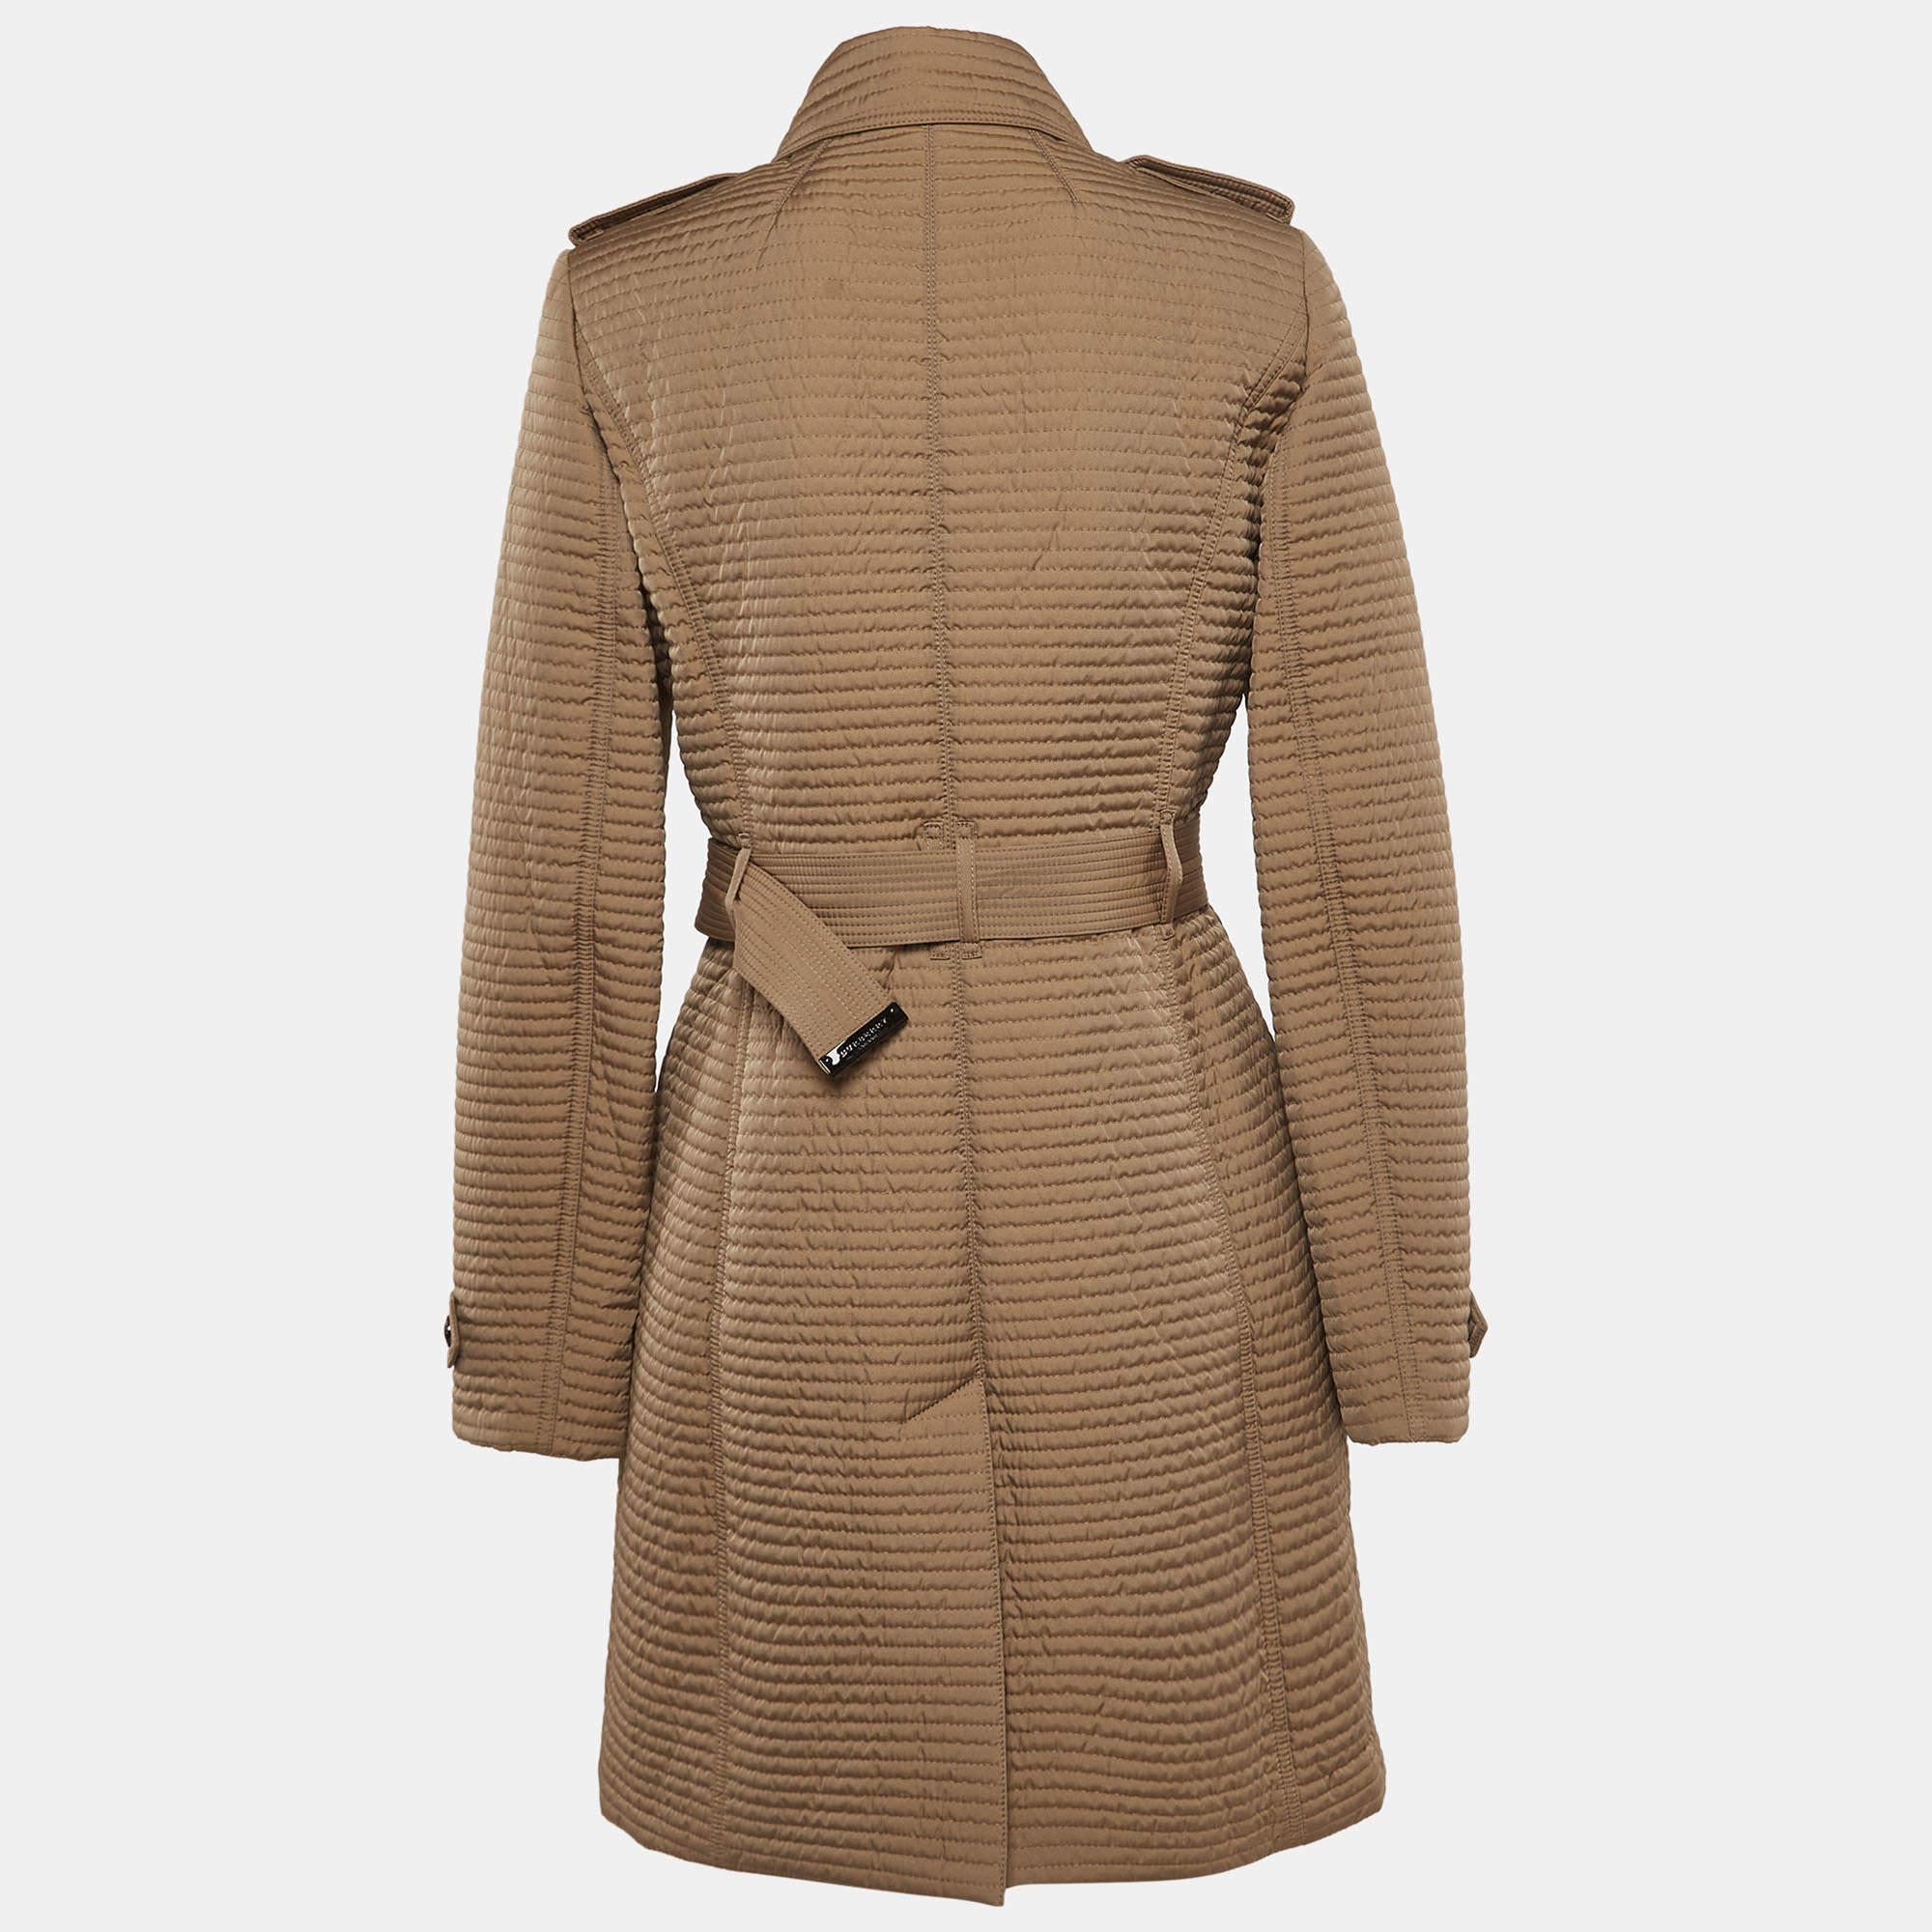 Crafted by Burberry, this exquisite mid-length coat exudes refinement with its rich brown hue and quilted design. The double-breasted silhouette adds a touch of timeless elegance, while the synthetic material ensures durability and weather